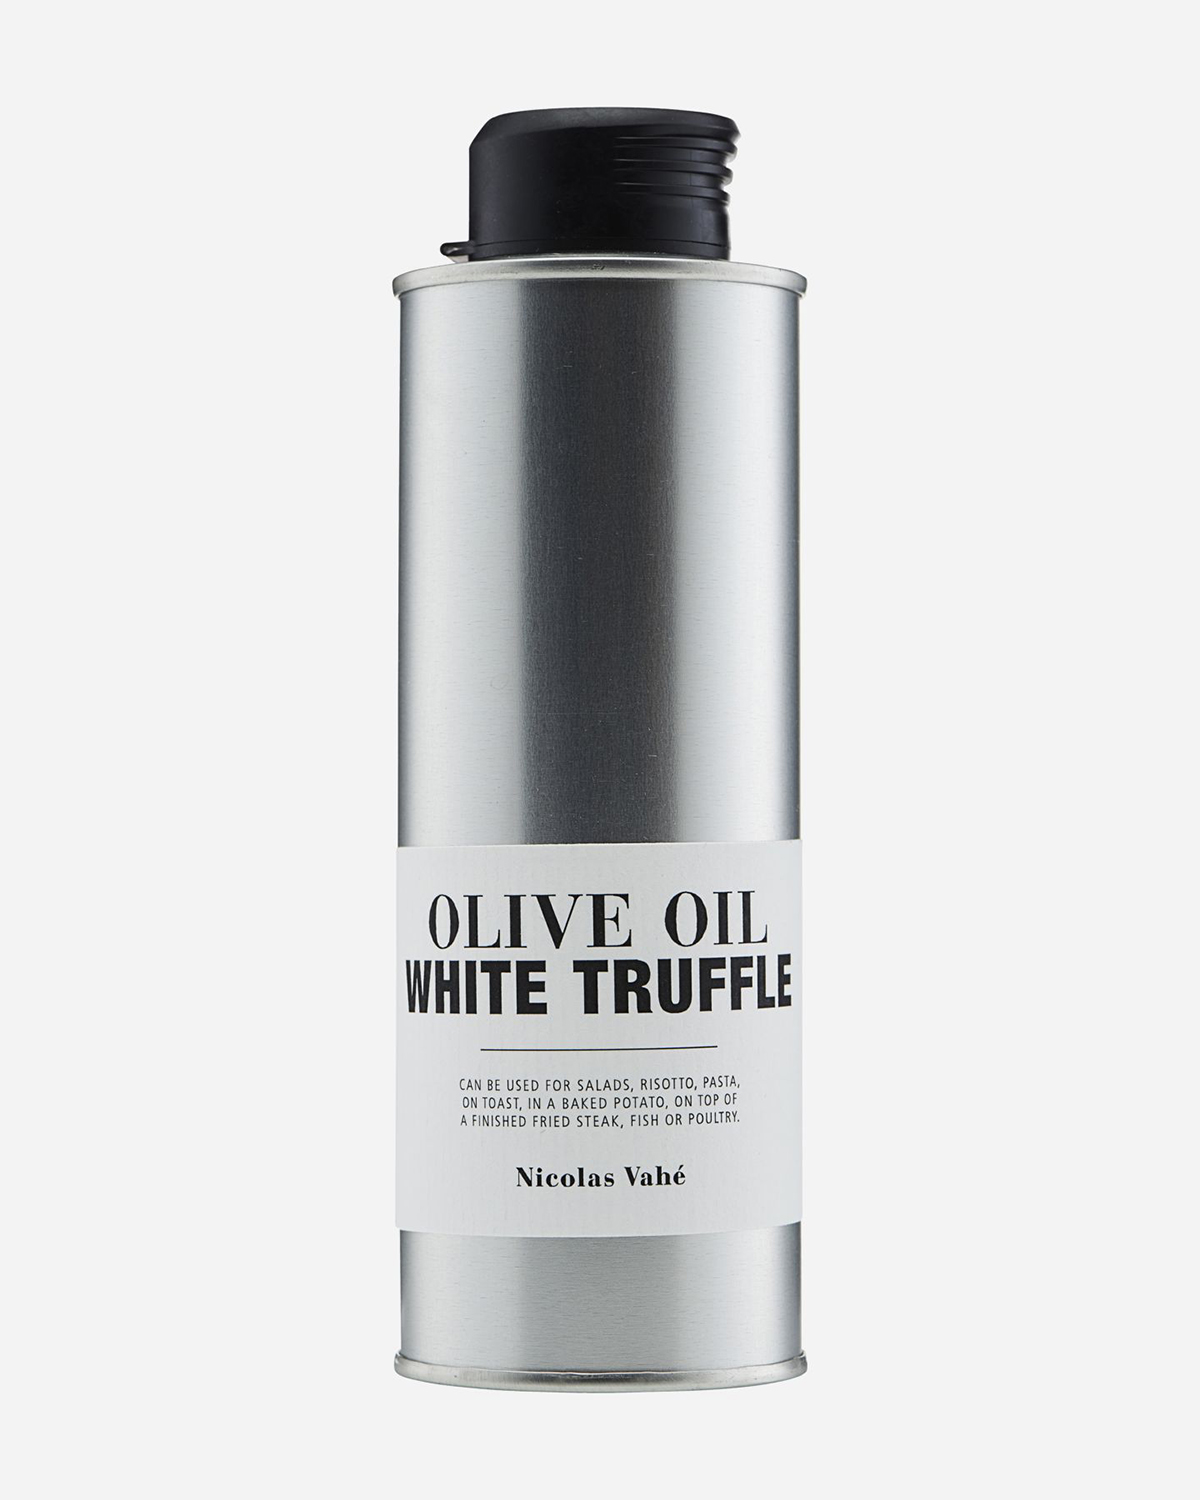 Virgin olive oil with white truffle, 25 cl.